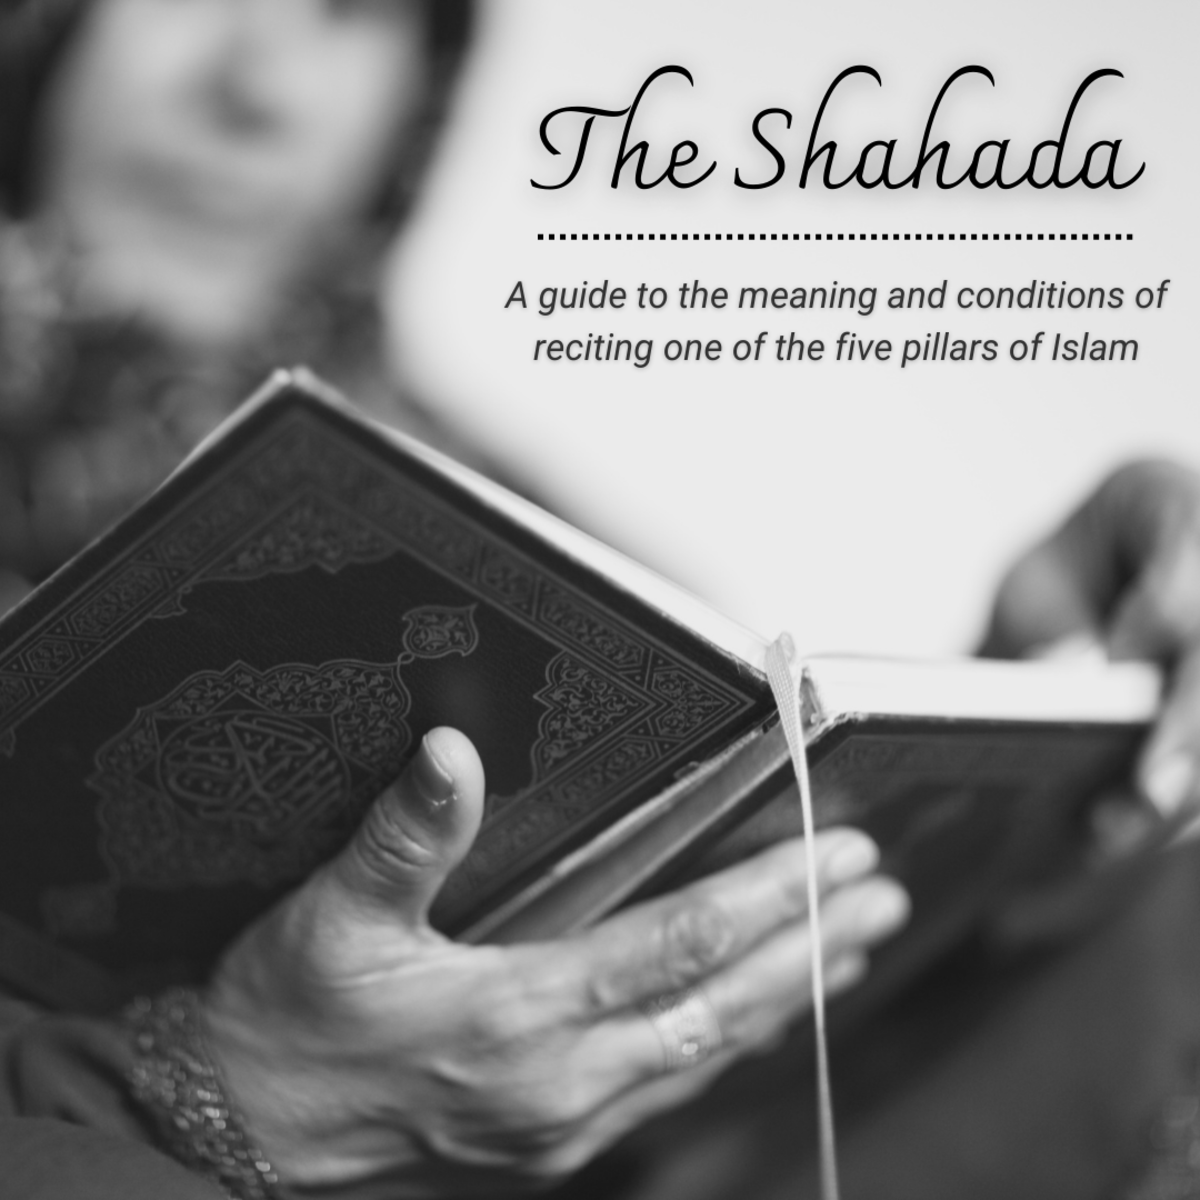 Conditions of the Shahada